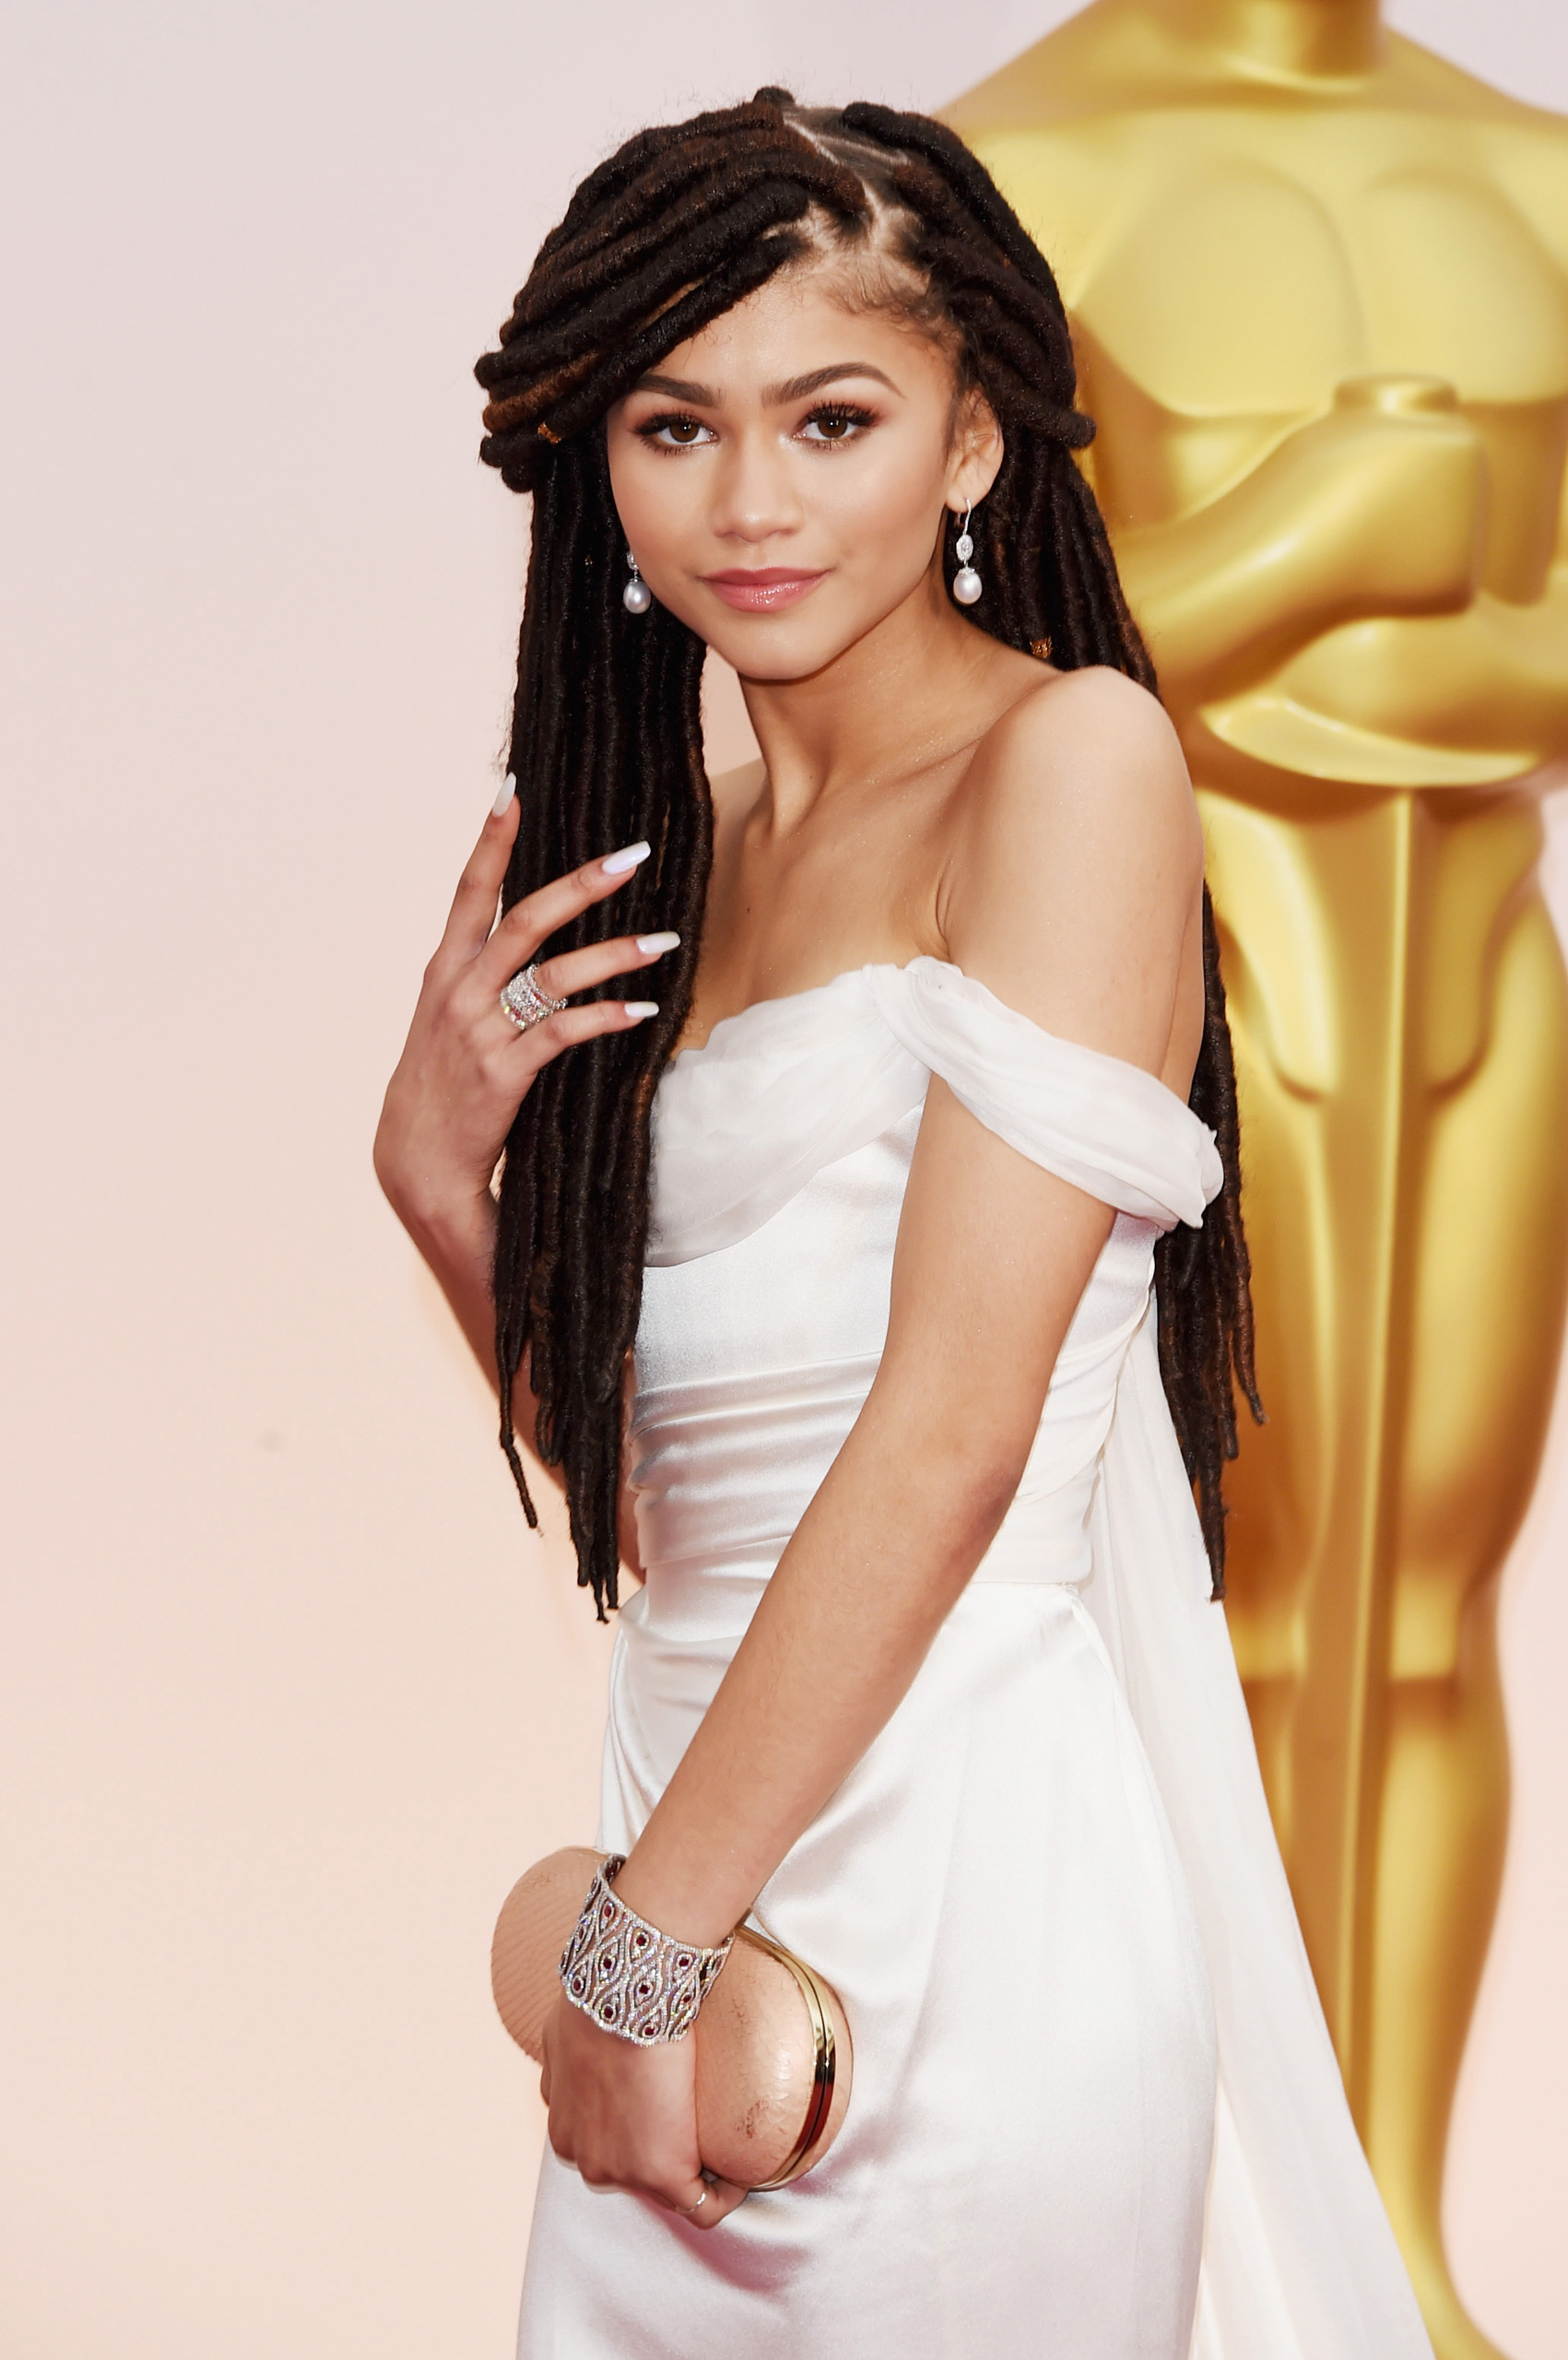 Zendaya attends the 87th Annual Academy Awards on Feb. 22, 2015 in Hollywood, Calif.